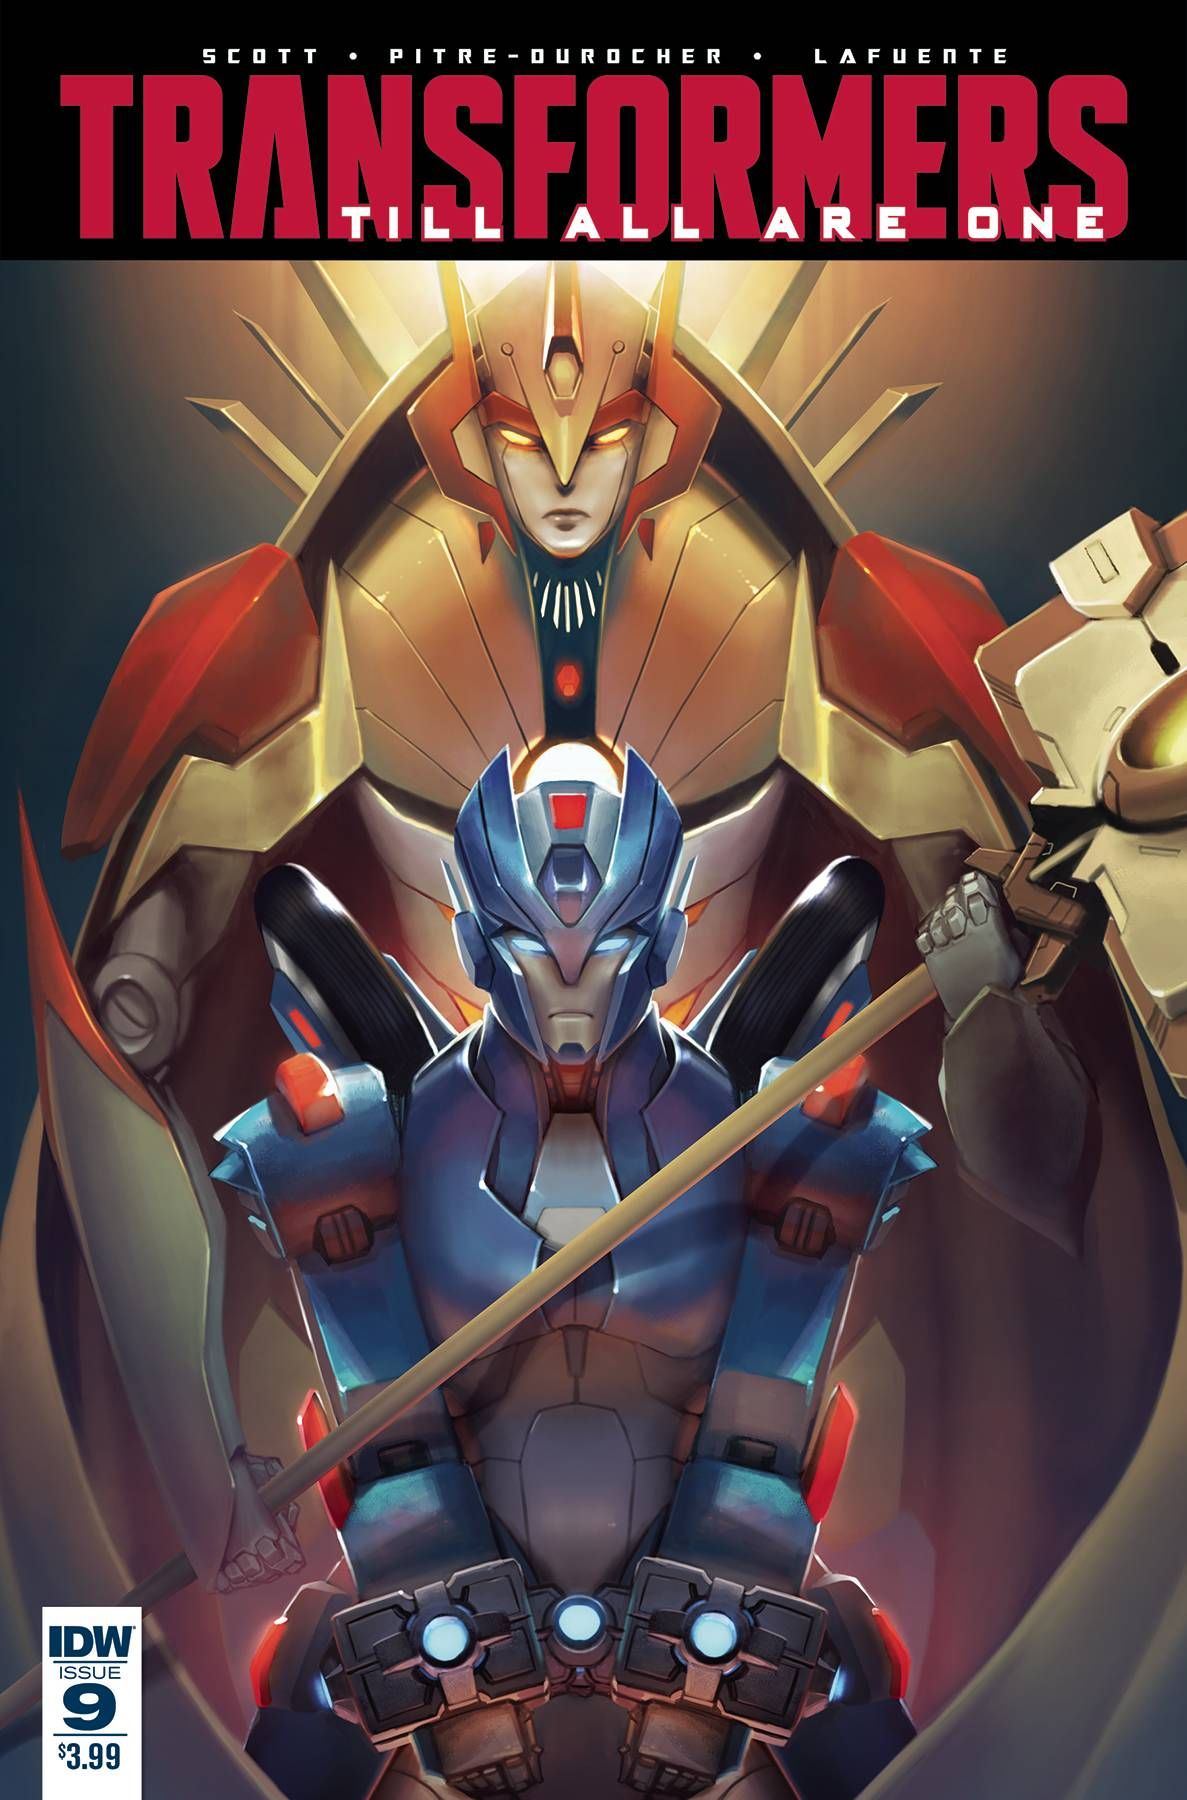 Transformers: Till All Are One #9 Comic